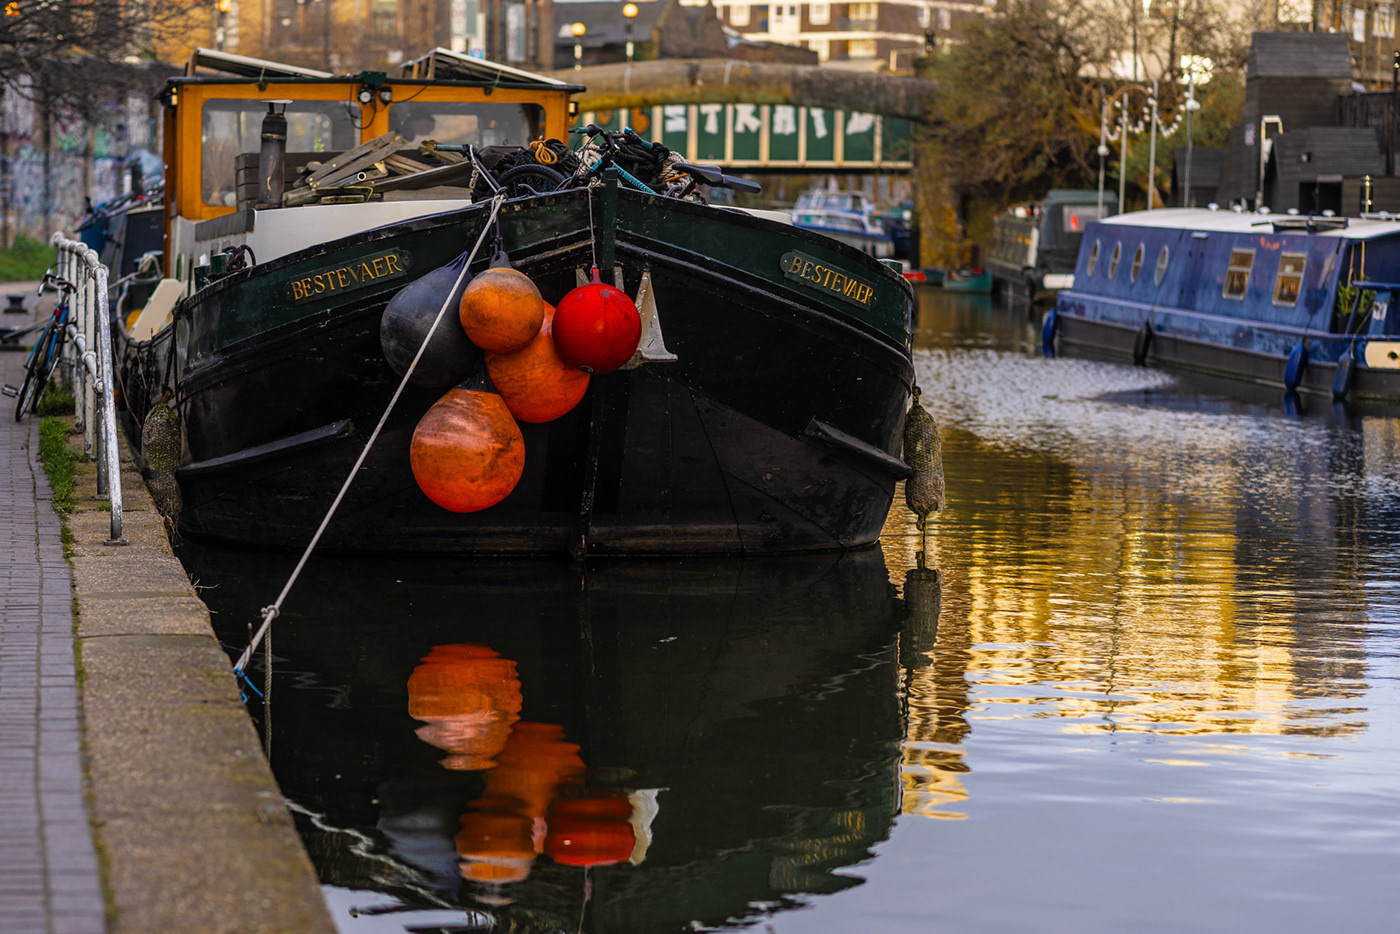 London Photography  photographer Shane Aurousseau canal Canalside narrowboats Waterways Waterways & Canals waterways of Britain